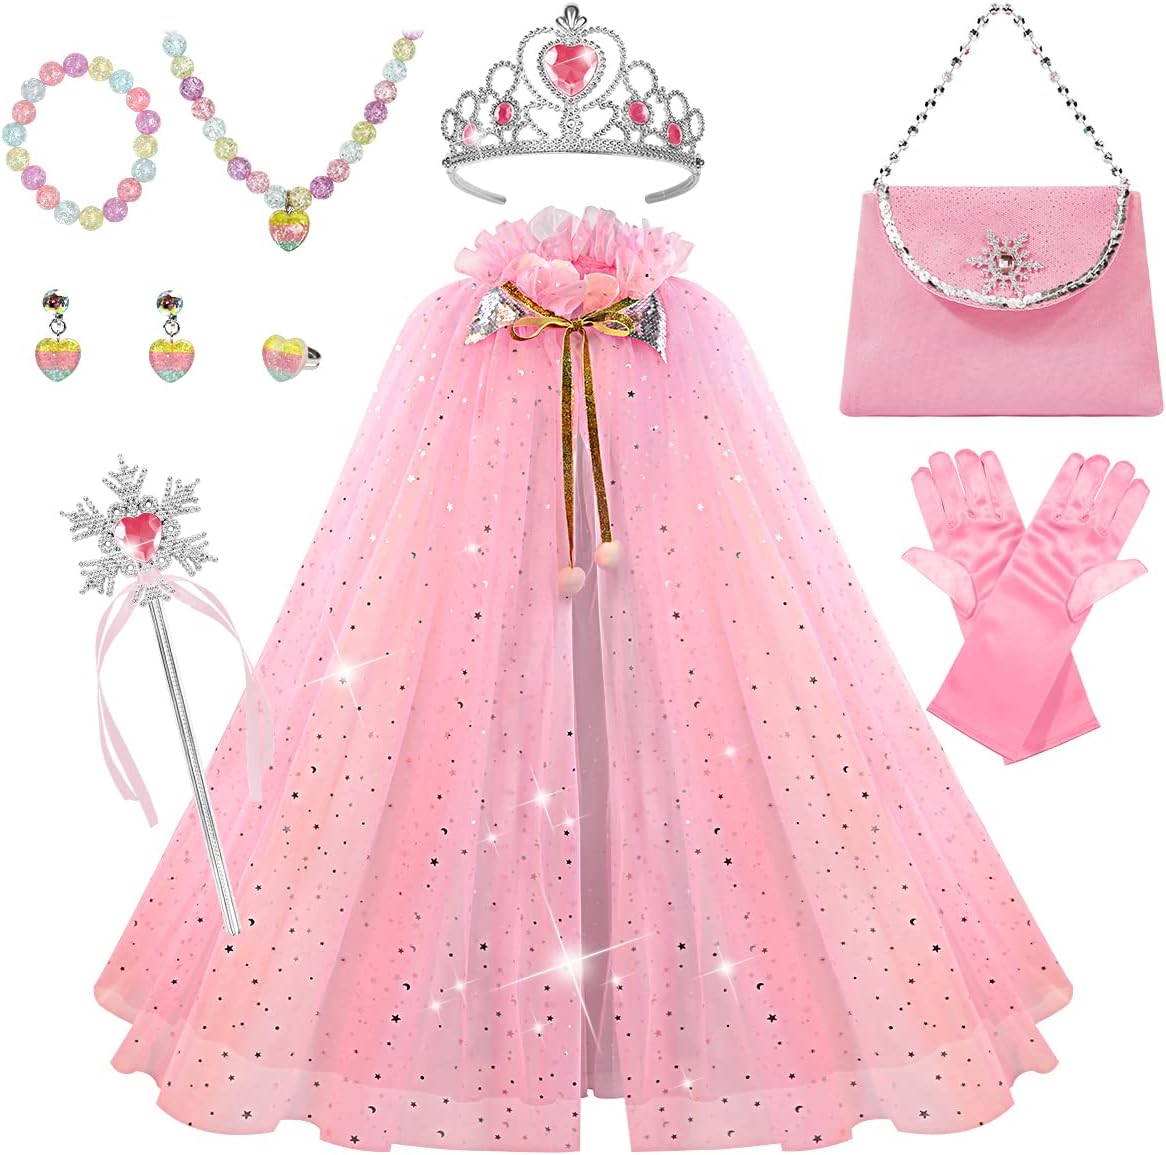 Princess Dress up Clothes for 3-8 Years Little Girl, 11Pcs Princess Cape with Crown - Cykapu